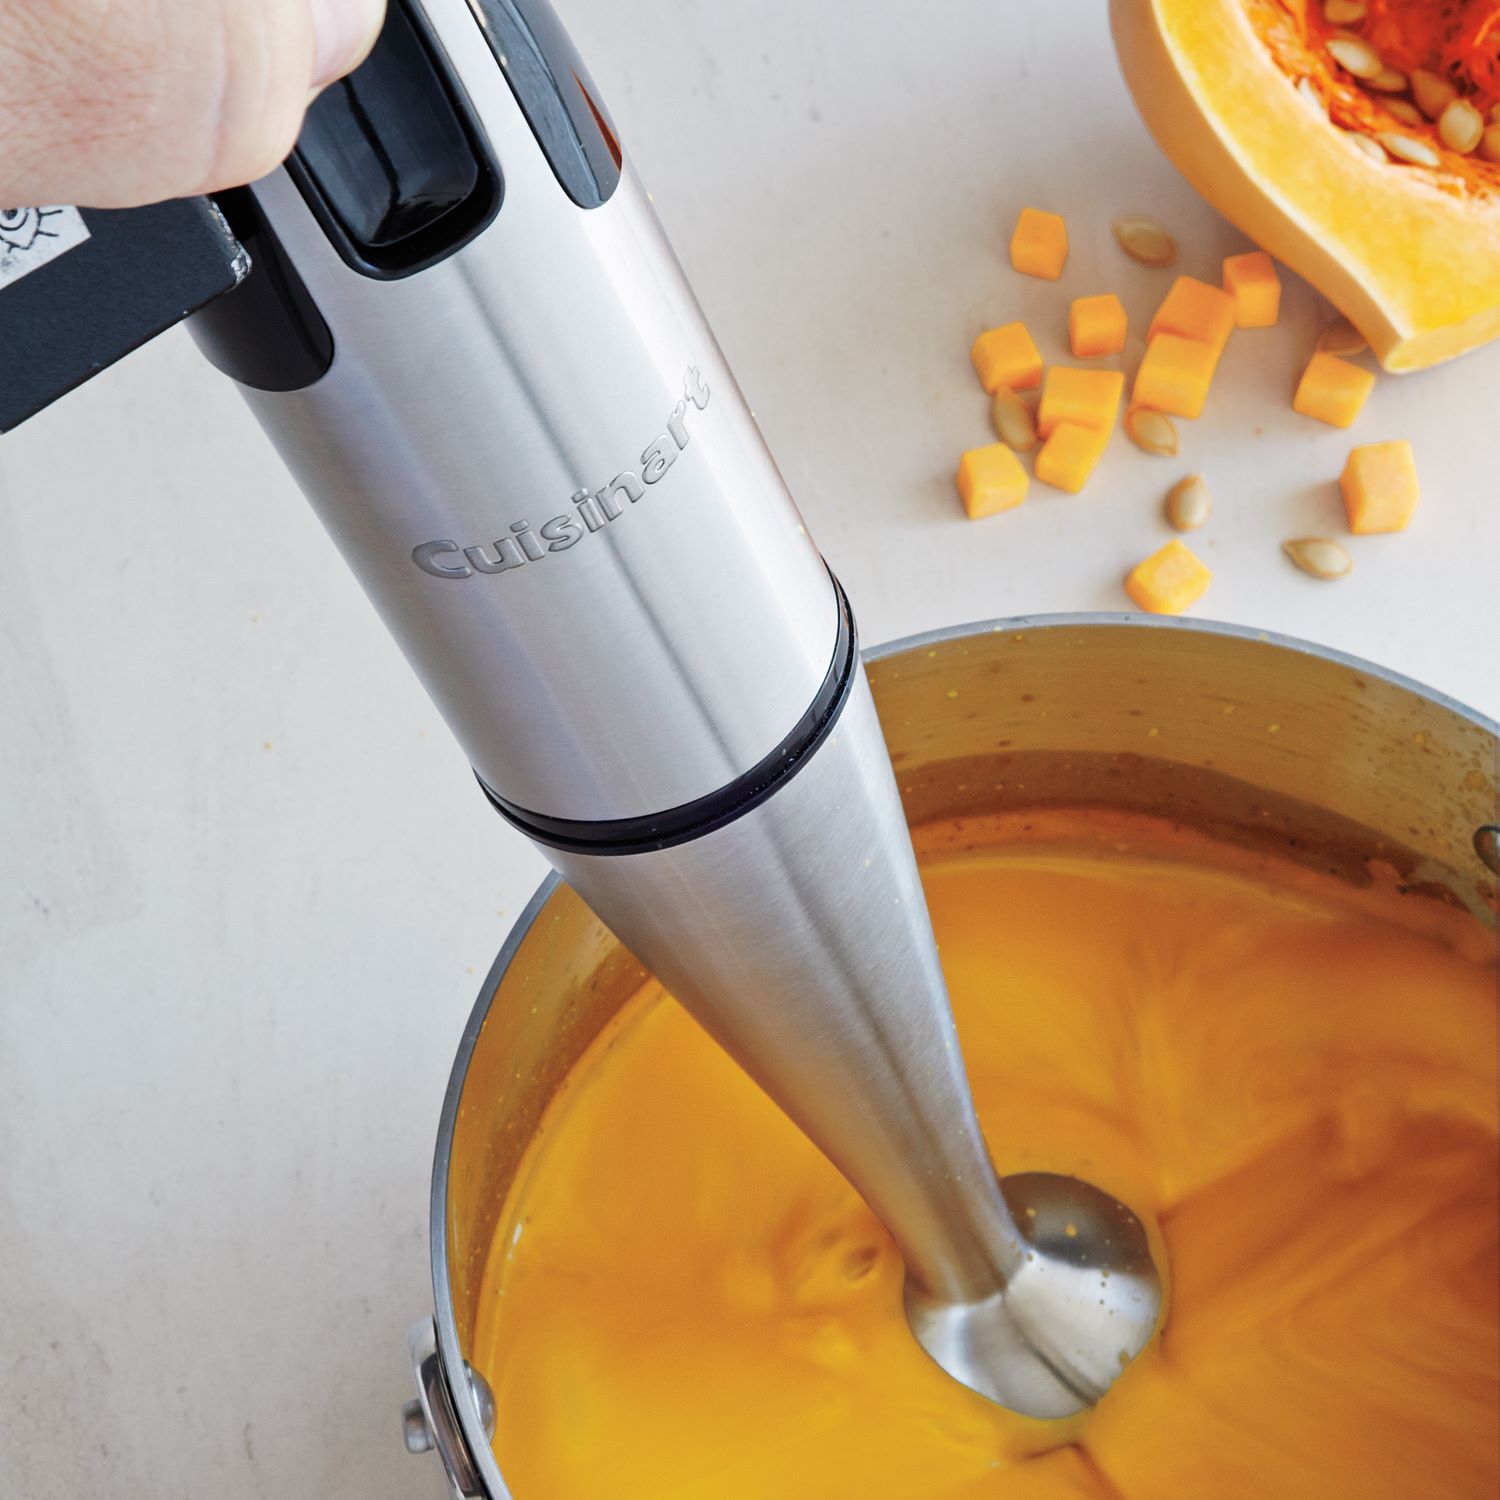 Your kitchen holiday gift guide: These 4 Sur La Table kitchen